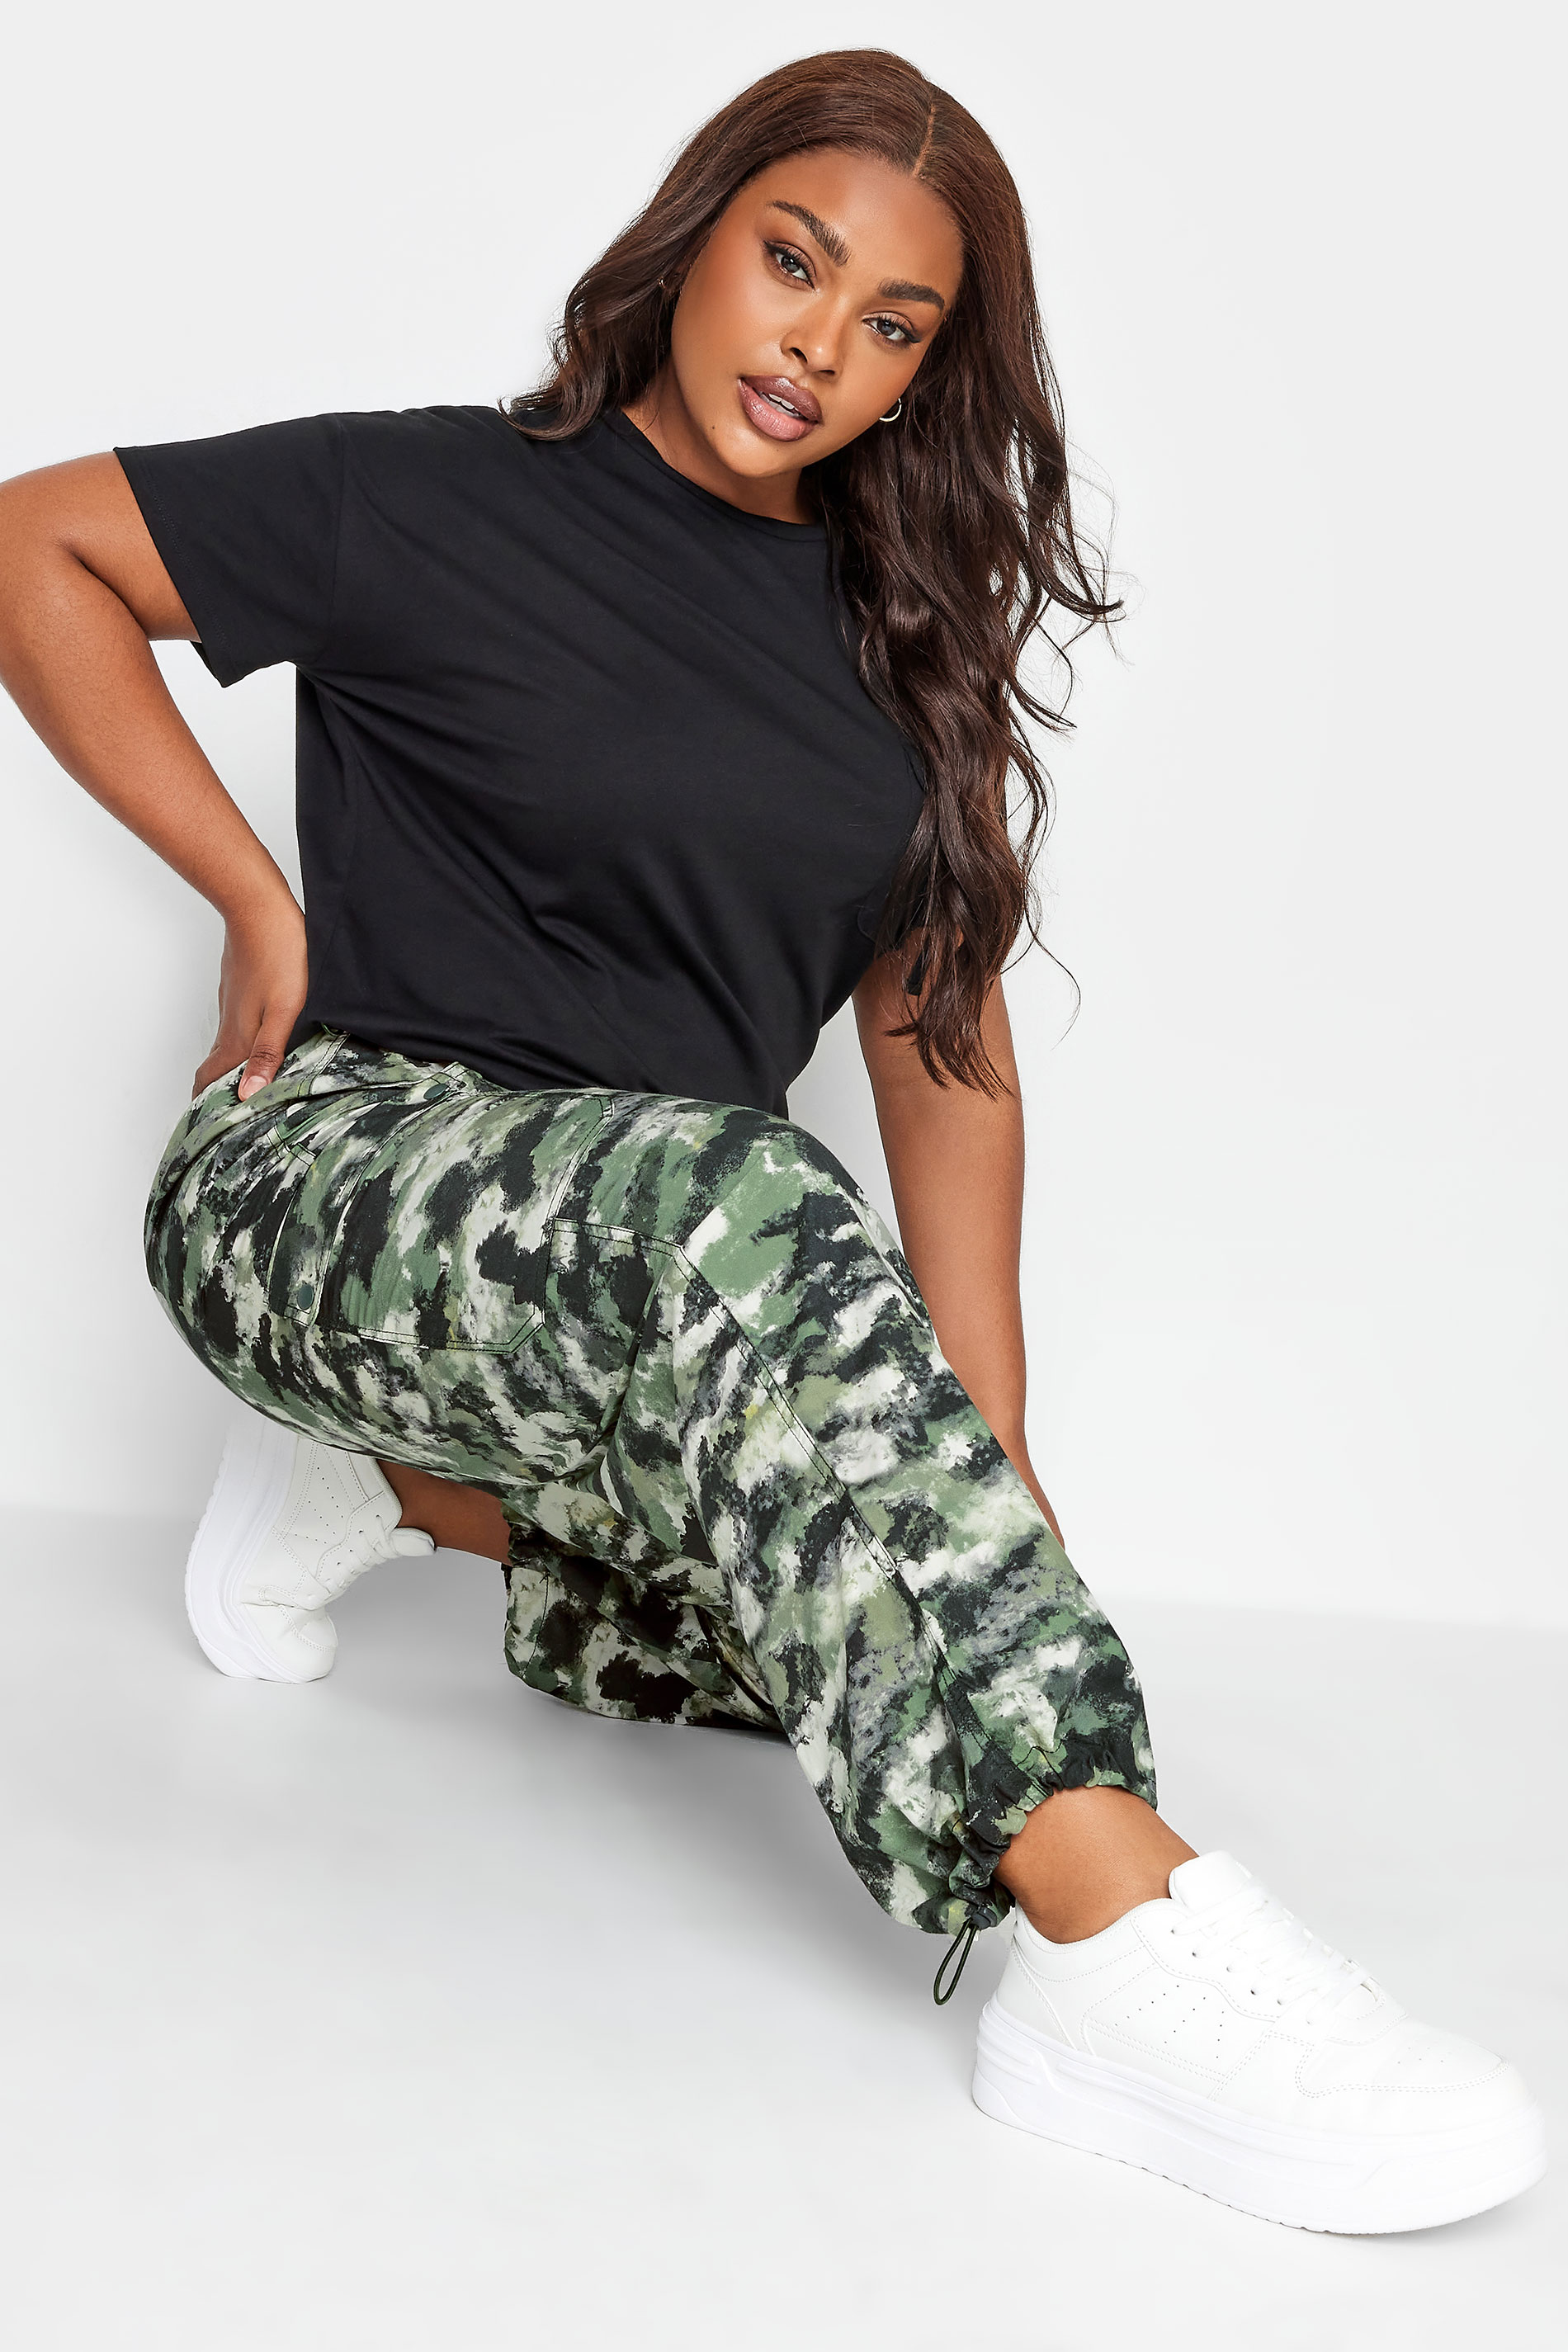 WMZJSZHY Cargo Pants Women High Waist Camo Plus Size Baggy Strairgt Leg Y2K  Trendy Pants with Flap Pockets Casual Alt Pants Loose Downtown Girl  Clothing Indie Clothes Aesthetic at Amazon Women's Clothing